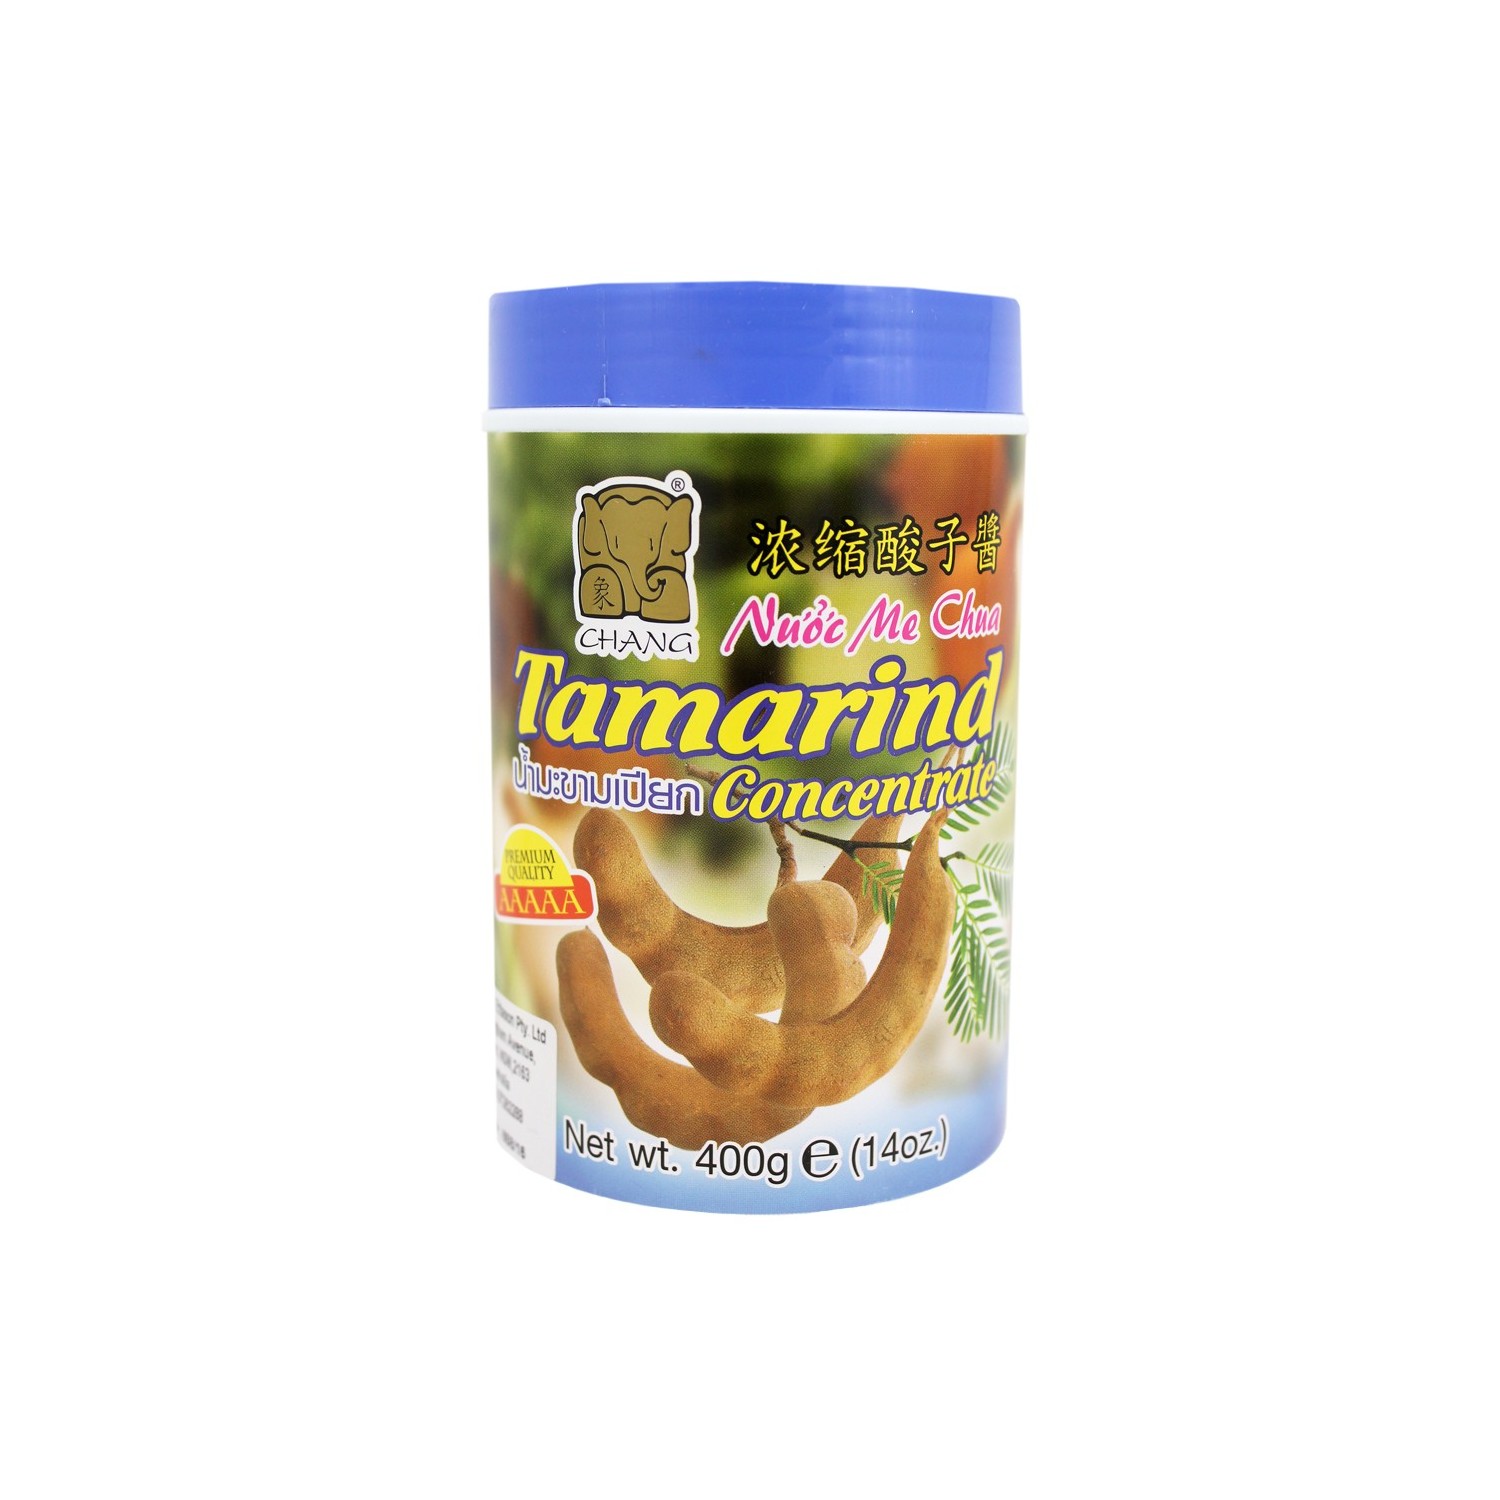 Chang Tamarind 400g Concentrate Liquid